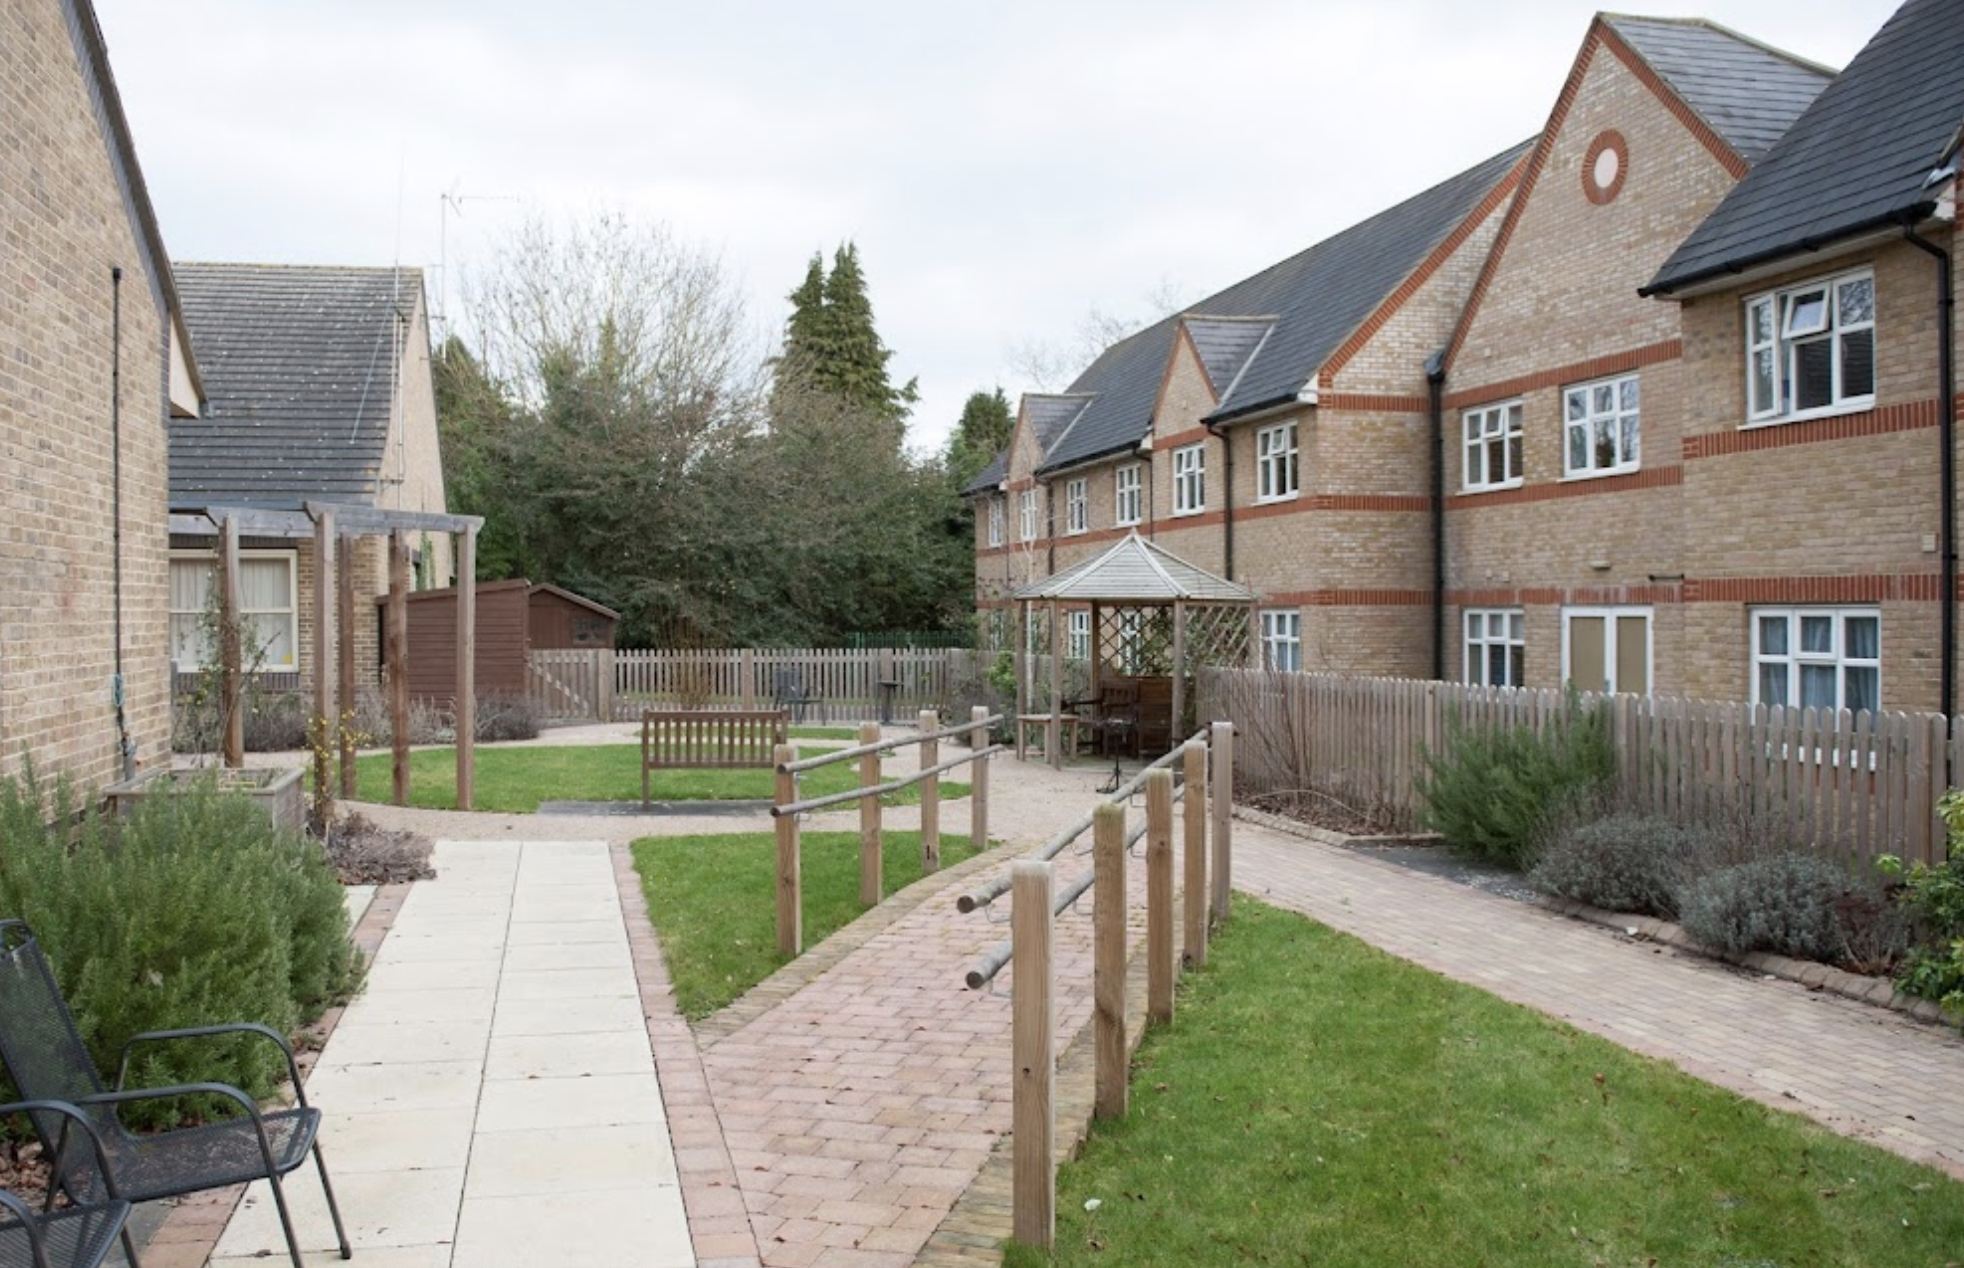 Bupa - St Marks care home 7